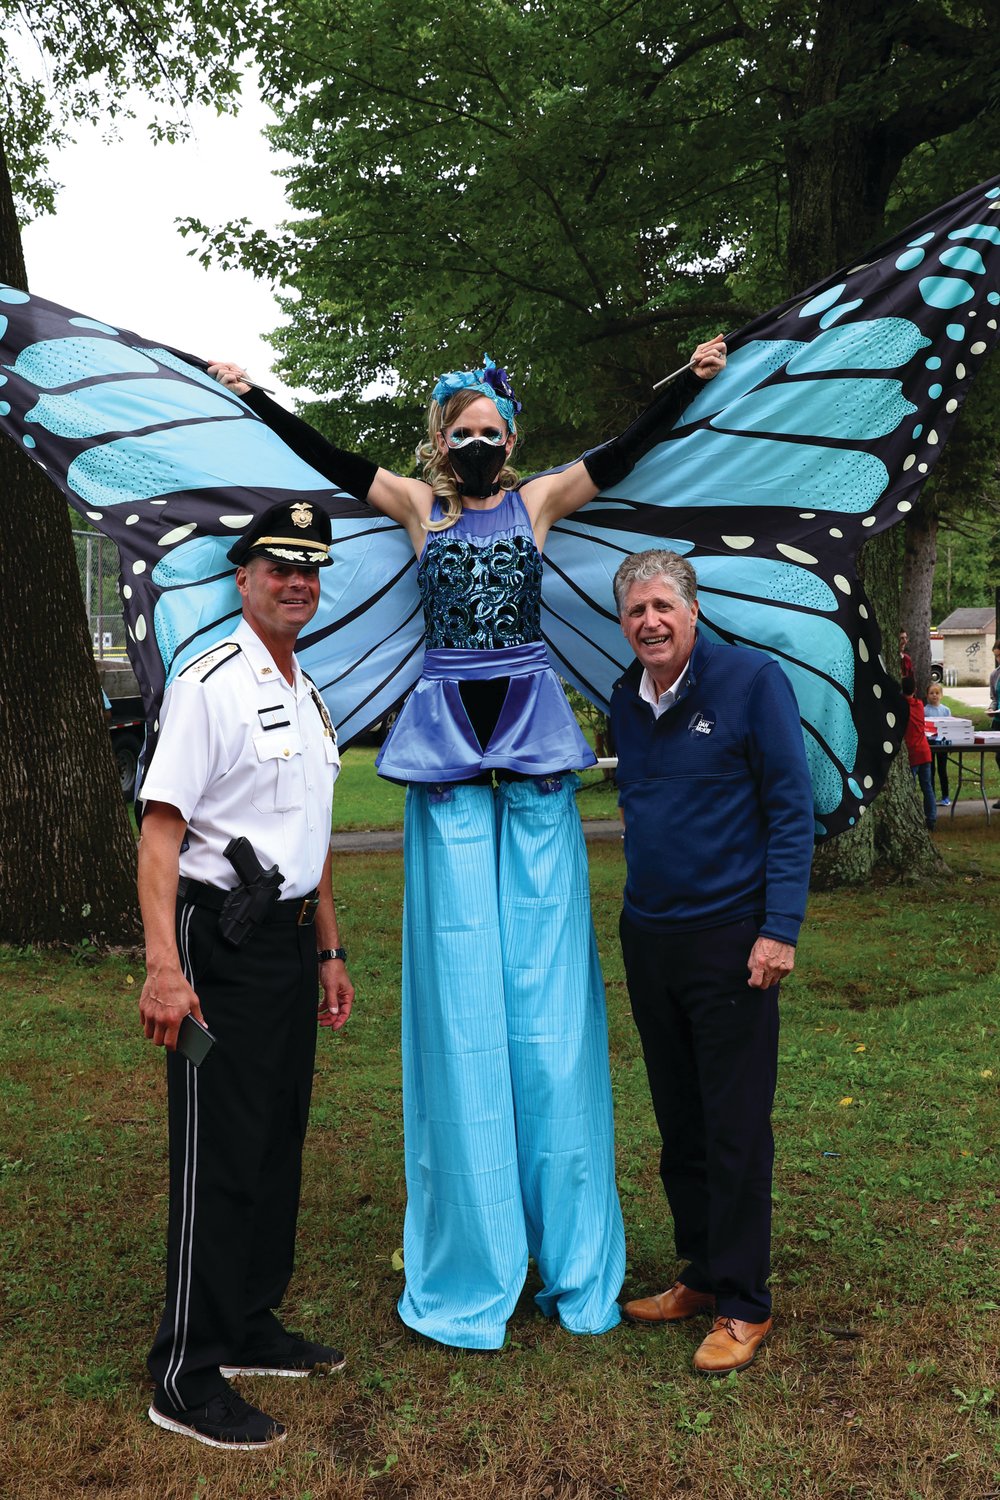 GRAND GUESTS: Gov. Daniel J. McKee and Johnston Police Chief Joseph P. Razza are joined by this beautifully dressed stilt walking butterfly that was one of many special attractions during the recent National Night Out.